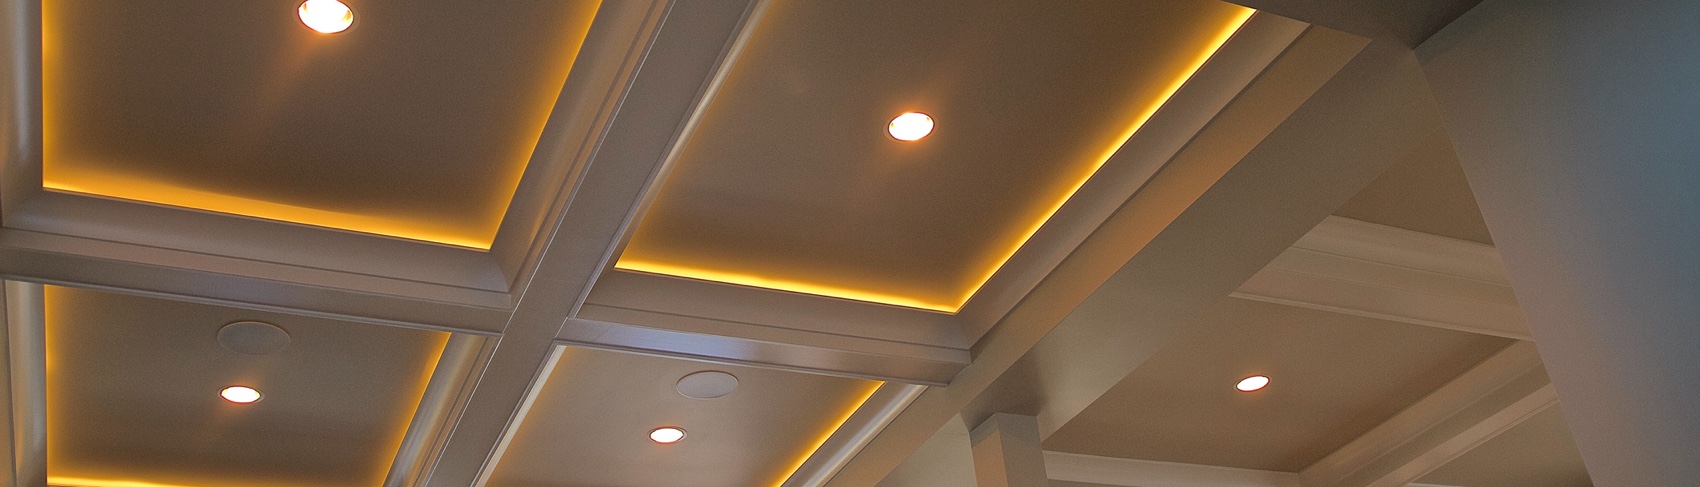 ceiling lighting that can be dimmed